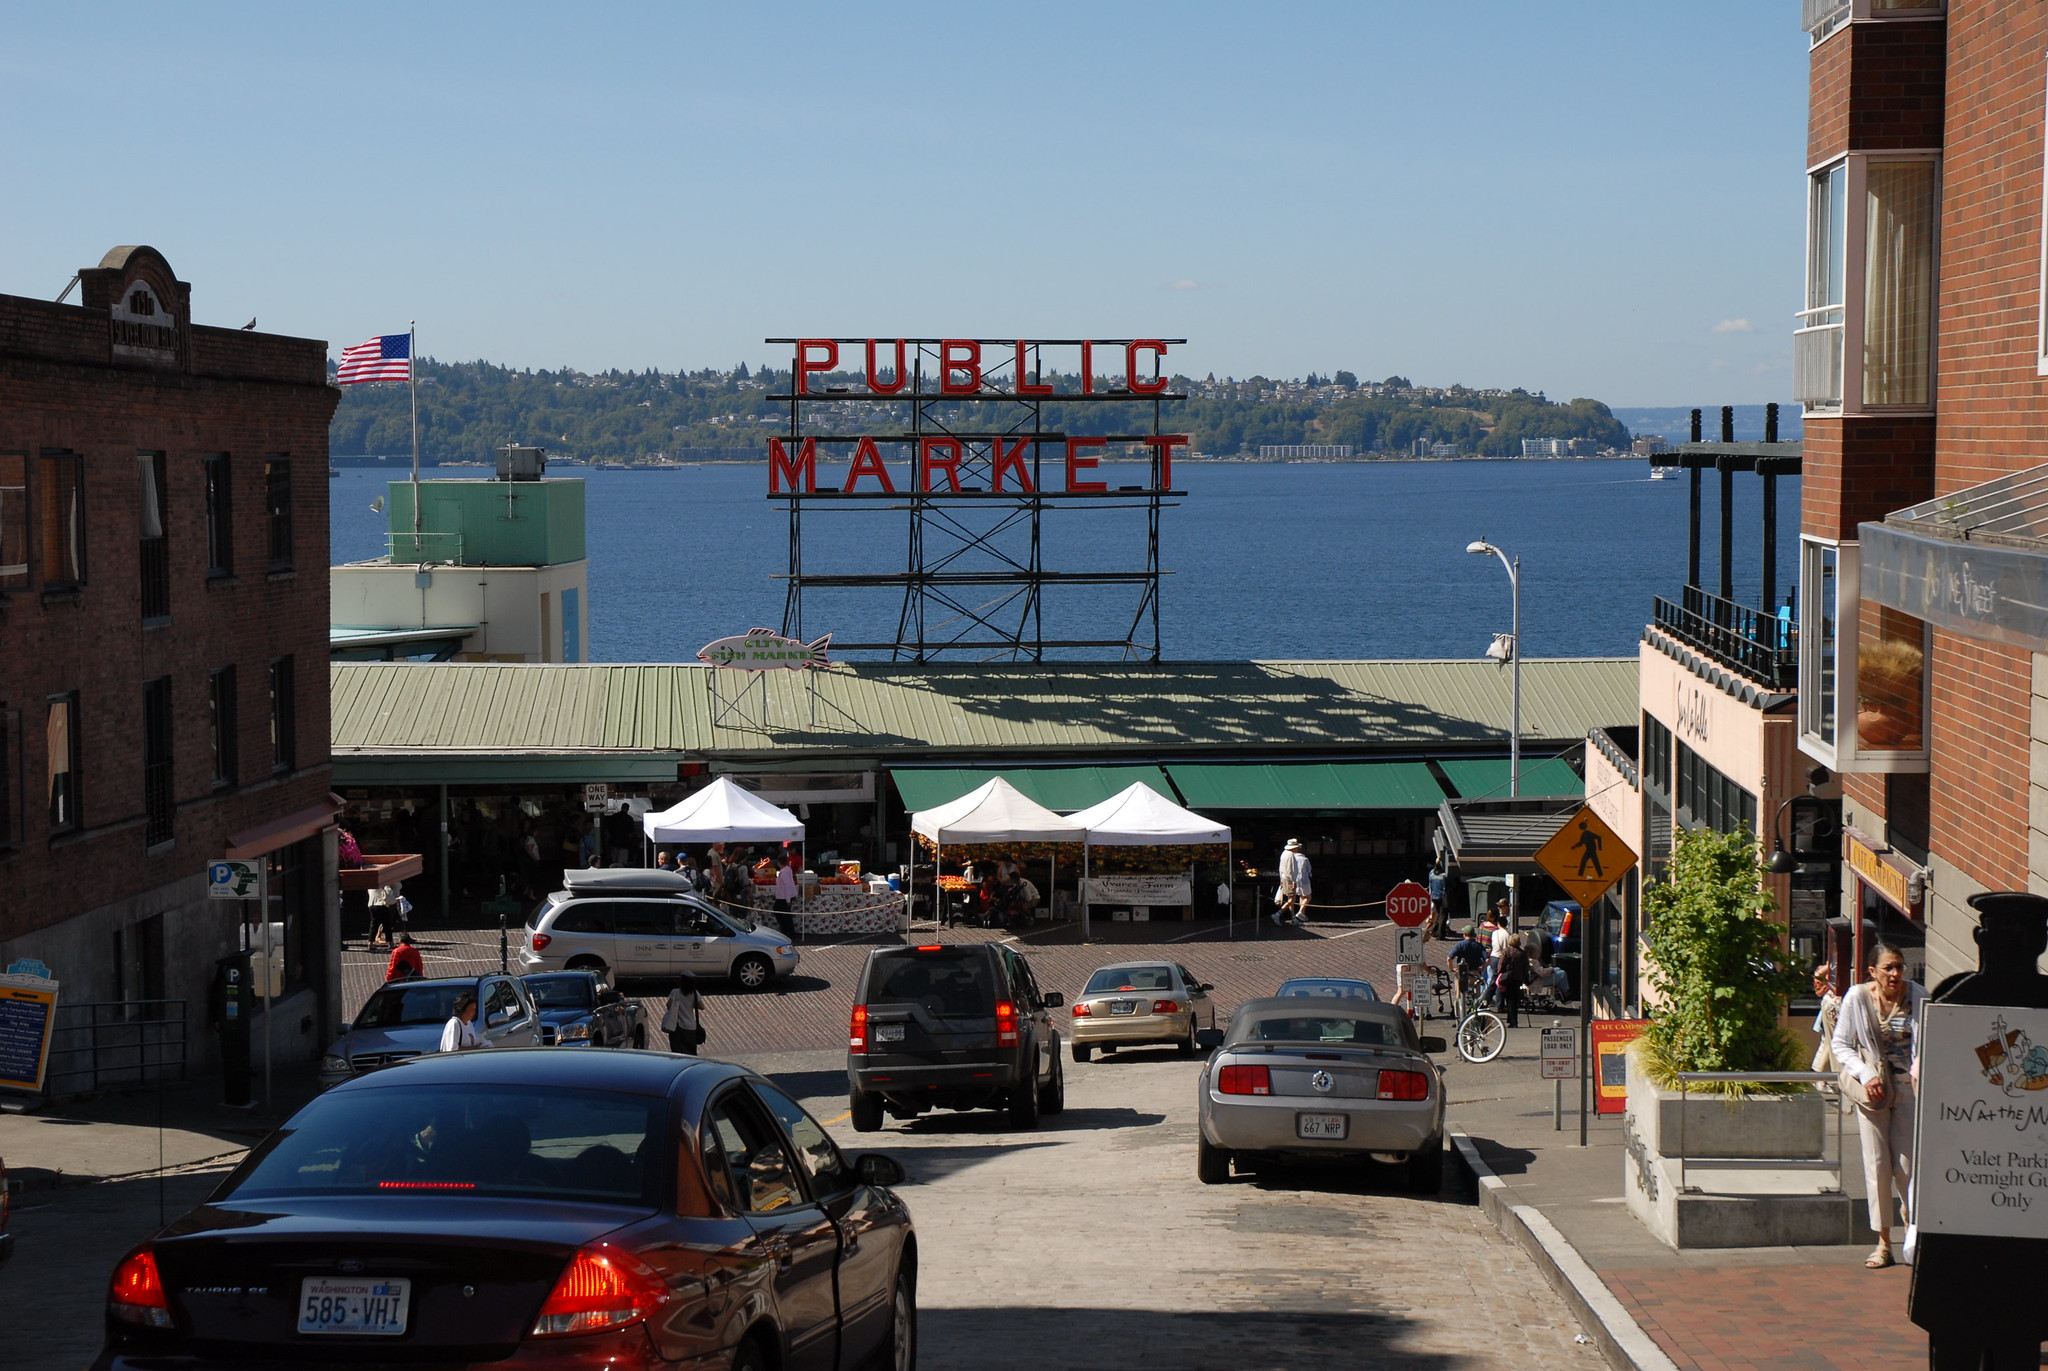 The Public Market at Pike Place in Seattle